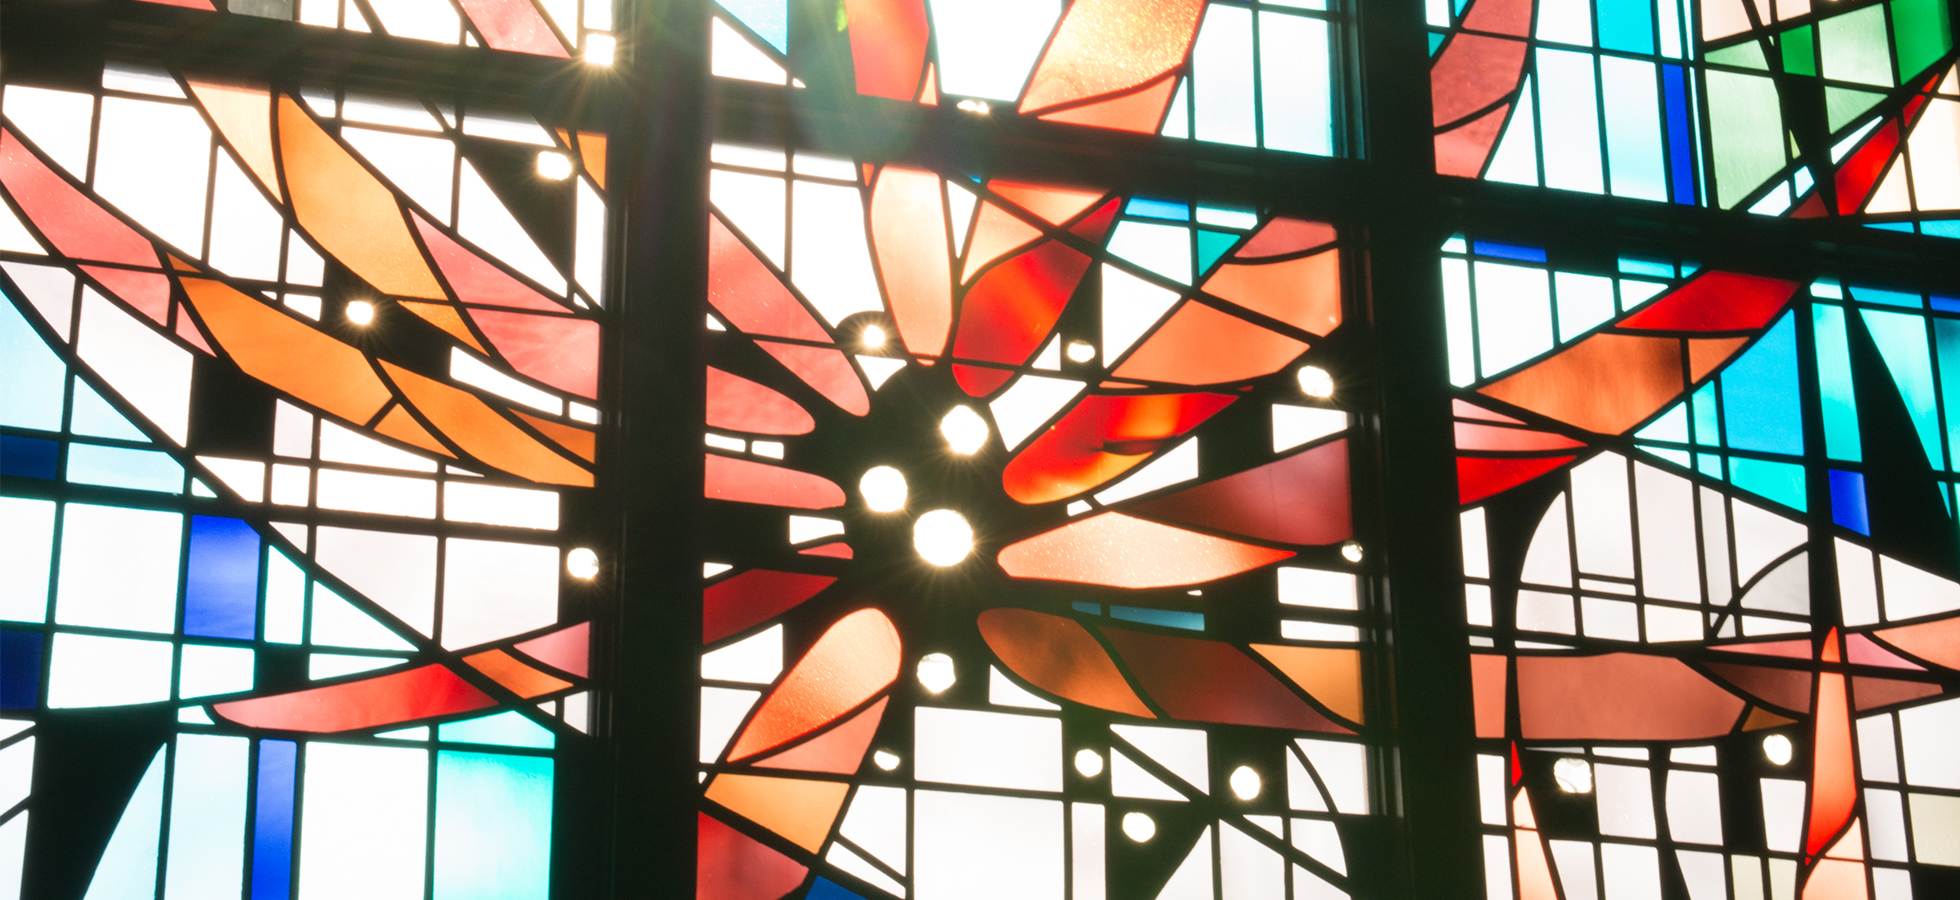 A stained glass window in the Chapel of the Holy Spirit on the Assumption campus in Worcester, Massachusetts